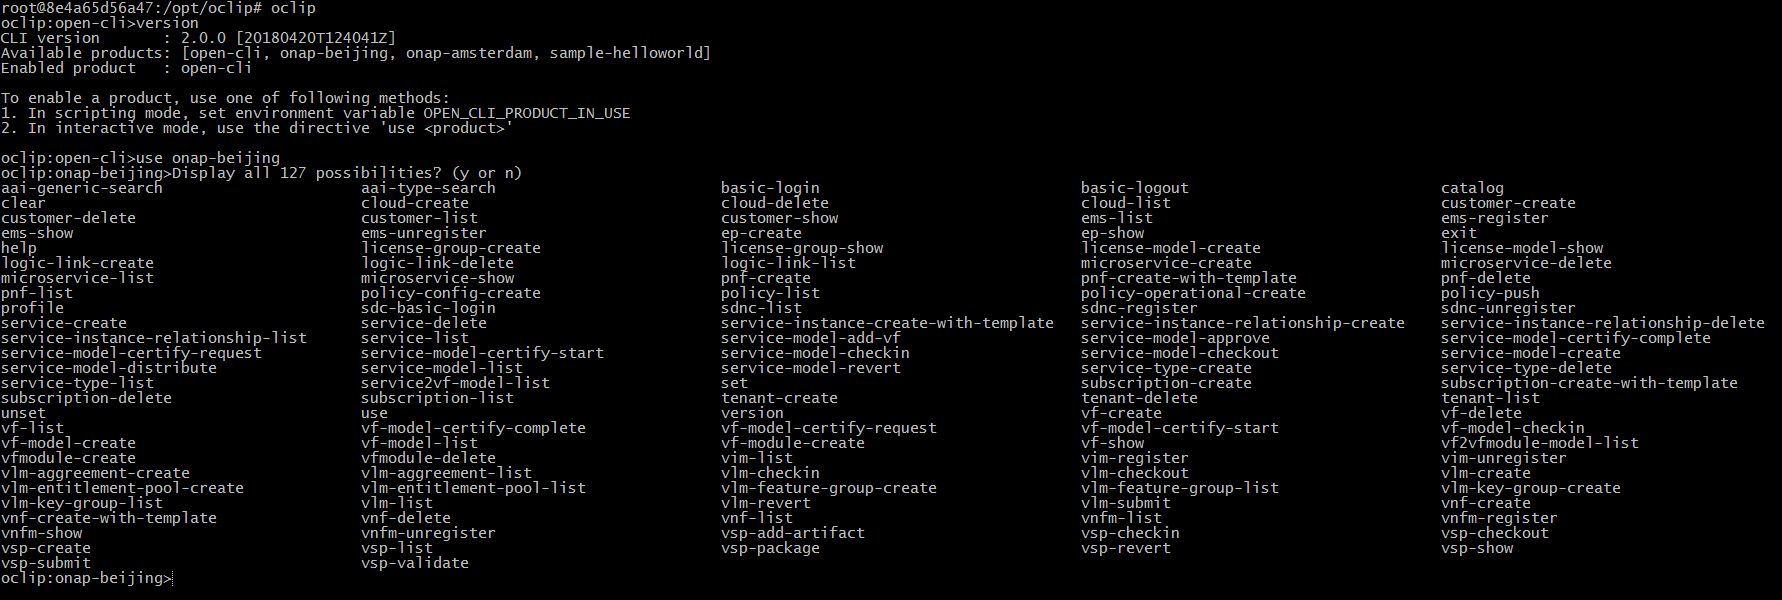 _images/portal-cli-shell.png